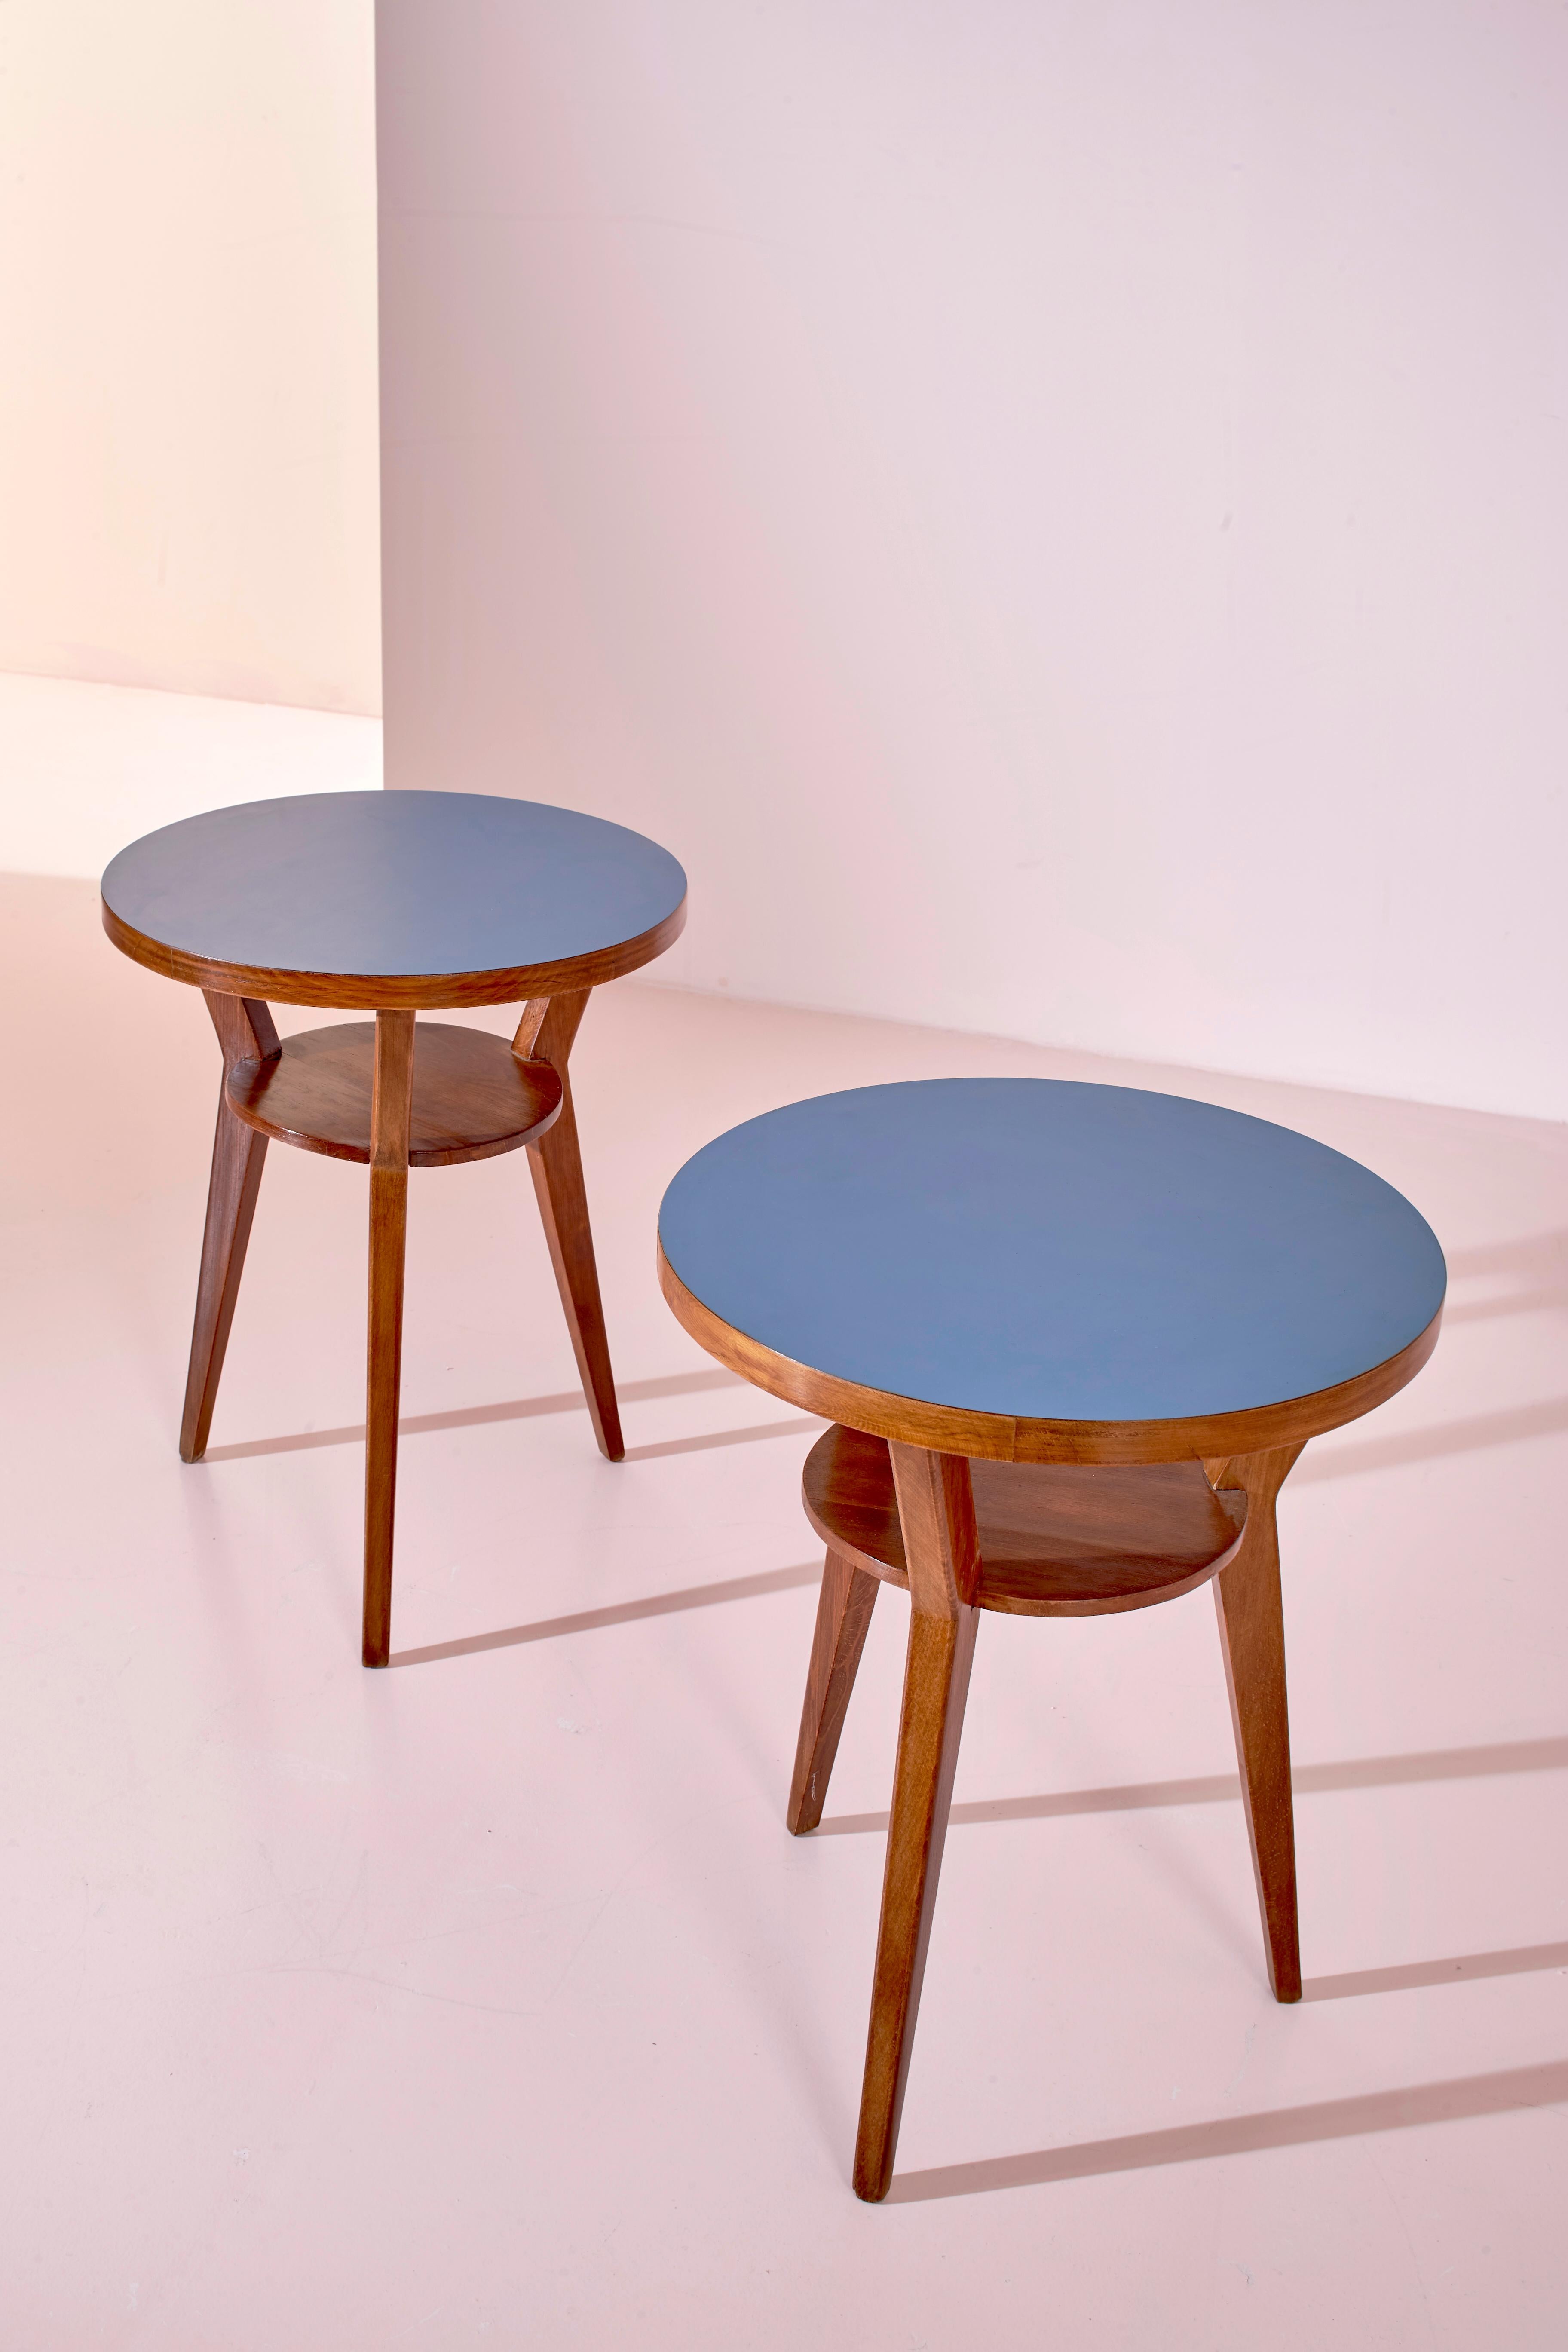 Mid-20th Century Gio Ponti pair of walnut and blue formica occasional tables, Italy, circa 1950 For Sale